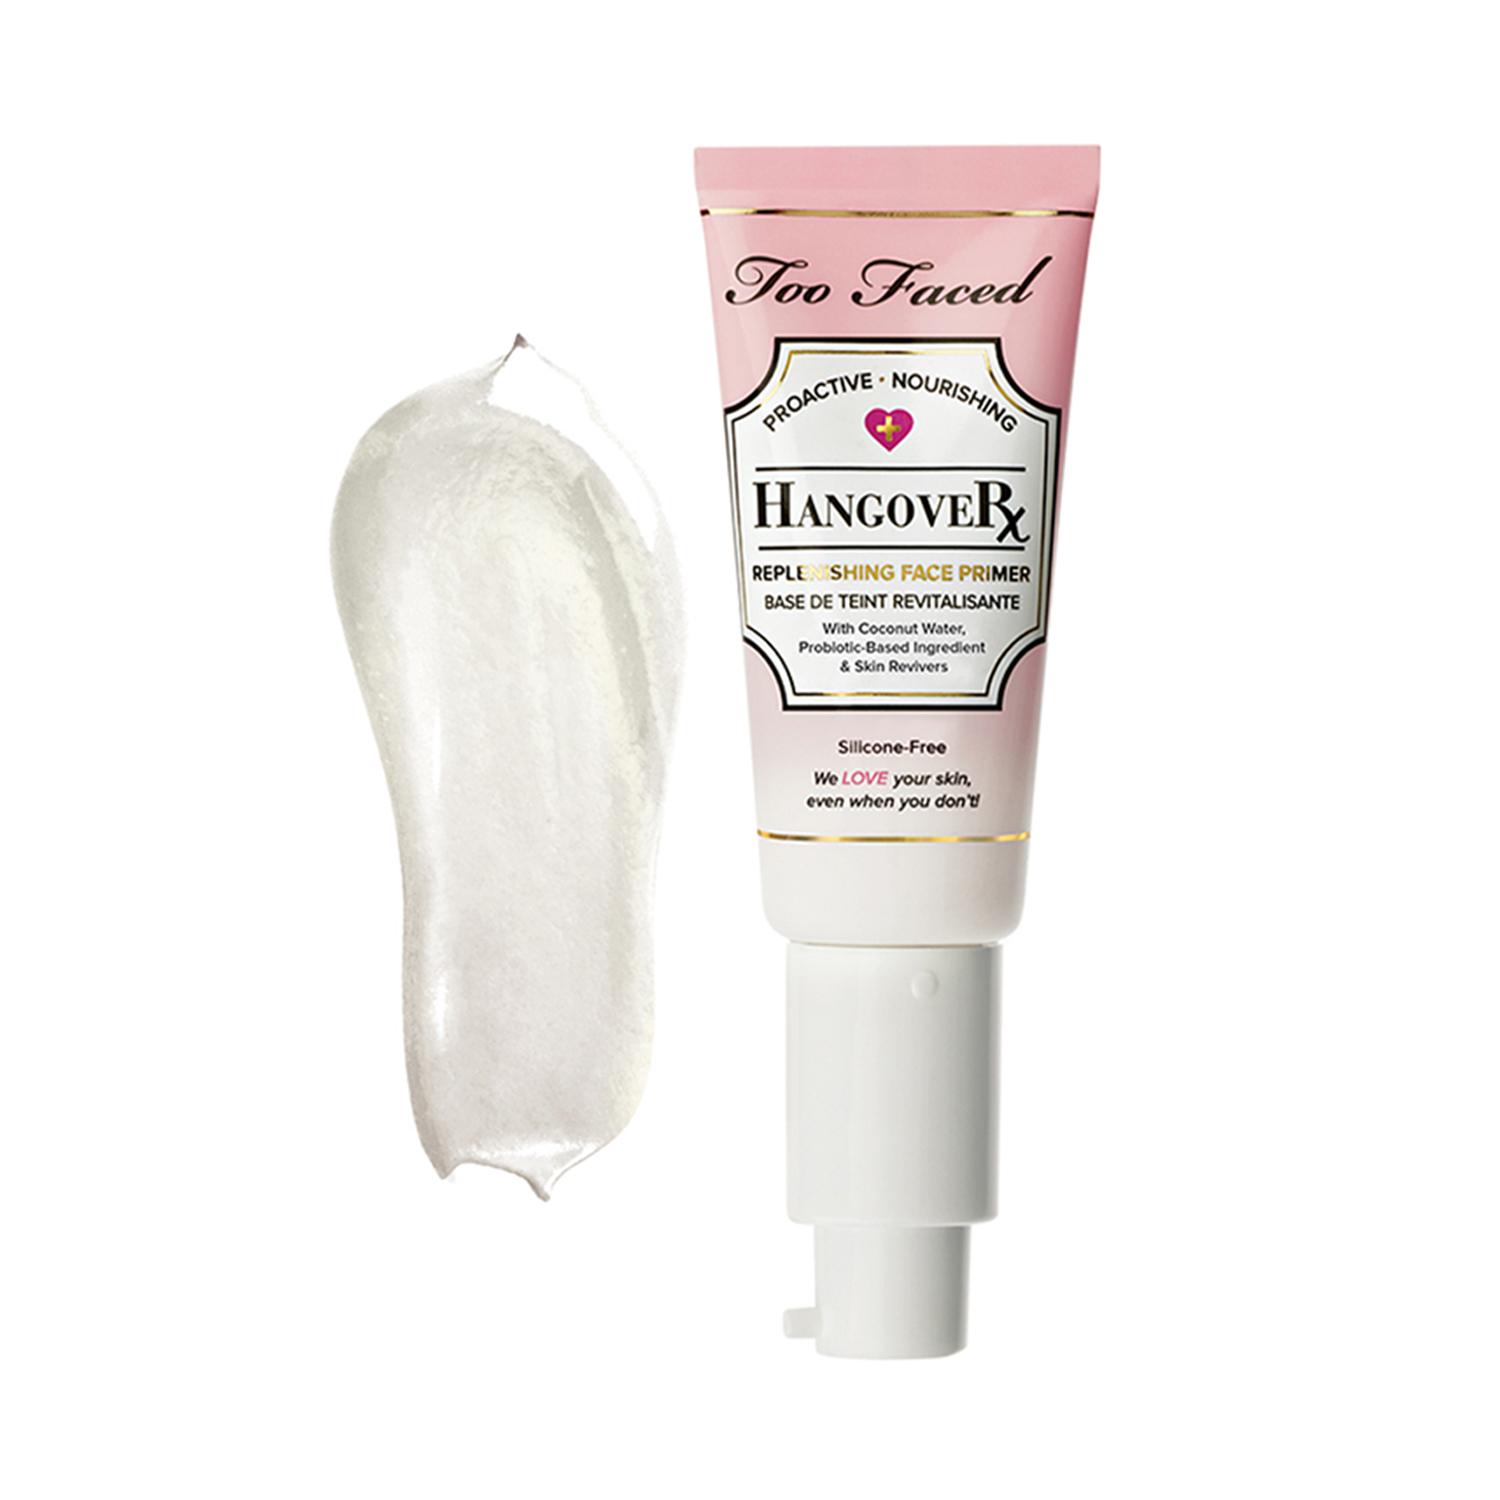 Too Faced | Too Faced Travel Size Hangover Replenishing Face Primer (20ml)